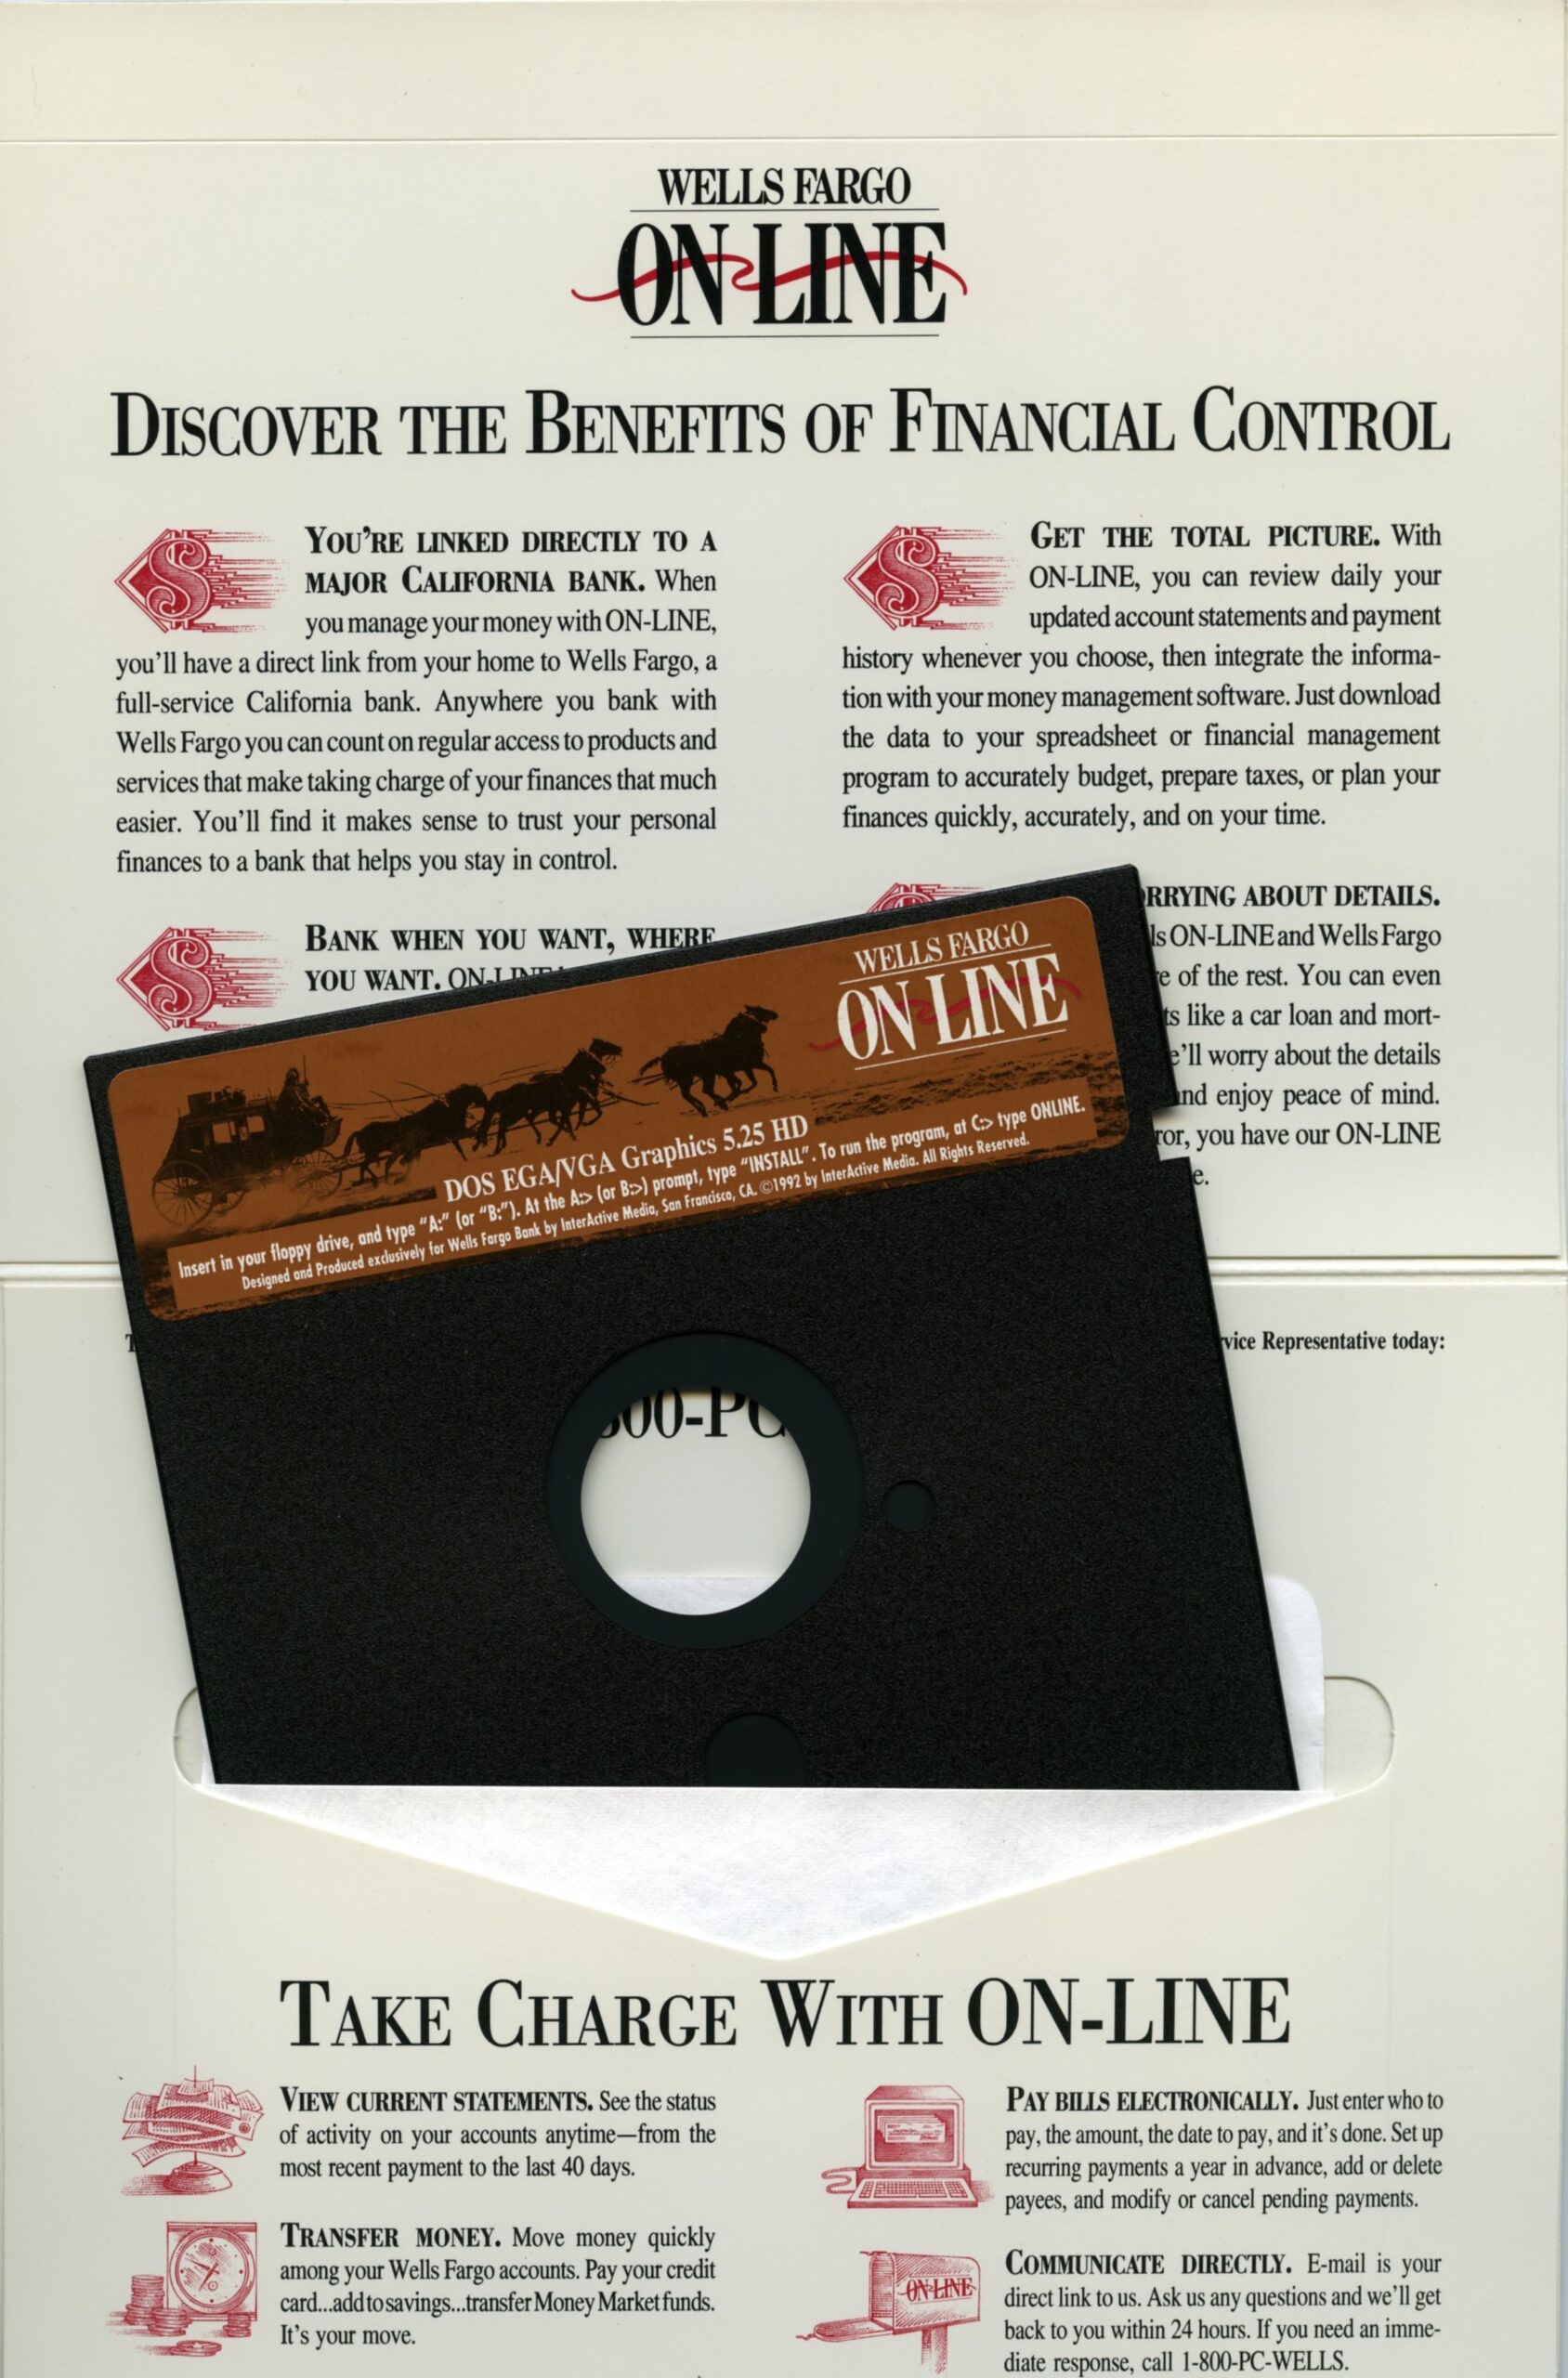 A cover for a floppy disk promotion, lying open with the floppy disk removed form its sleeve. It reads: Discover the benefits of financial control, take charge with on-line